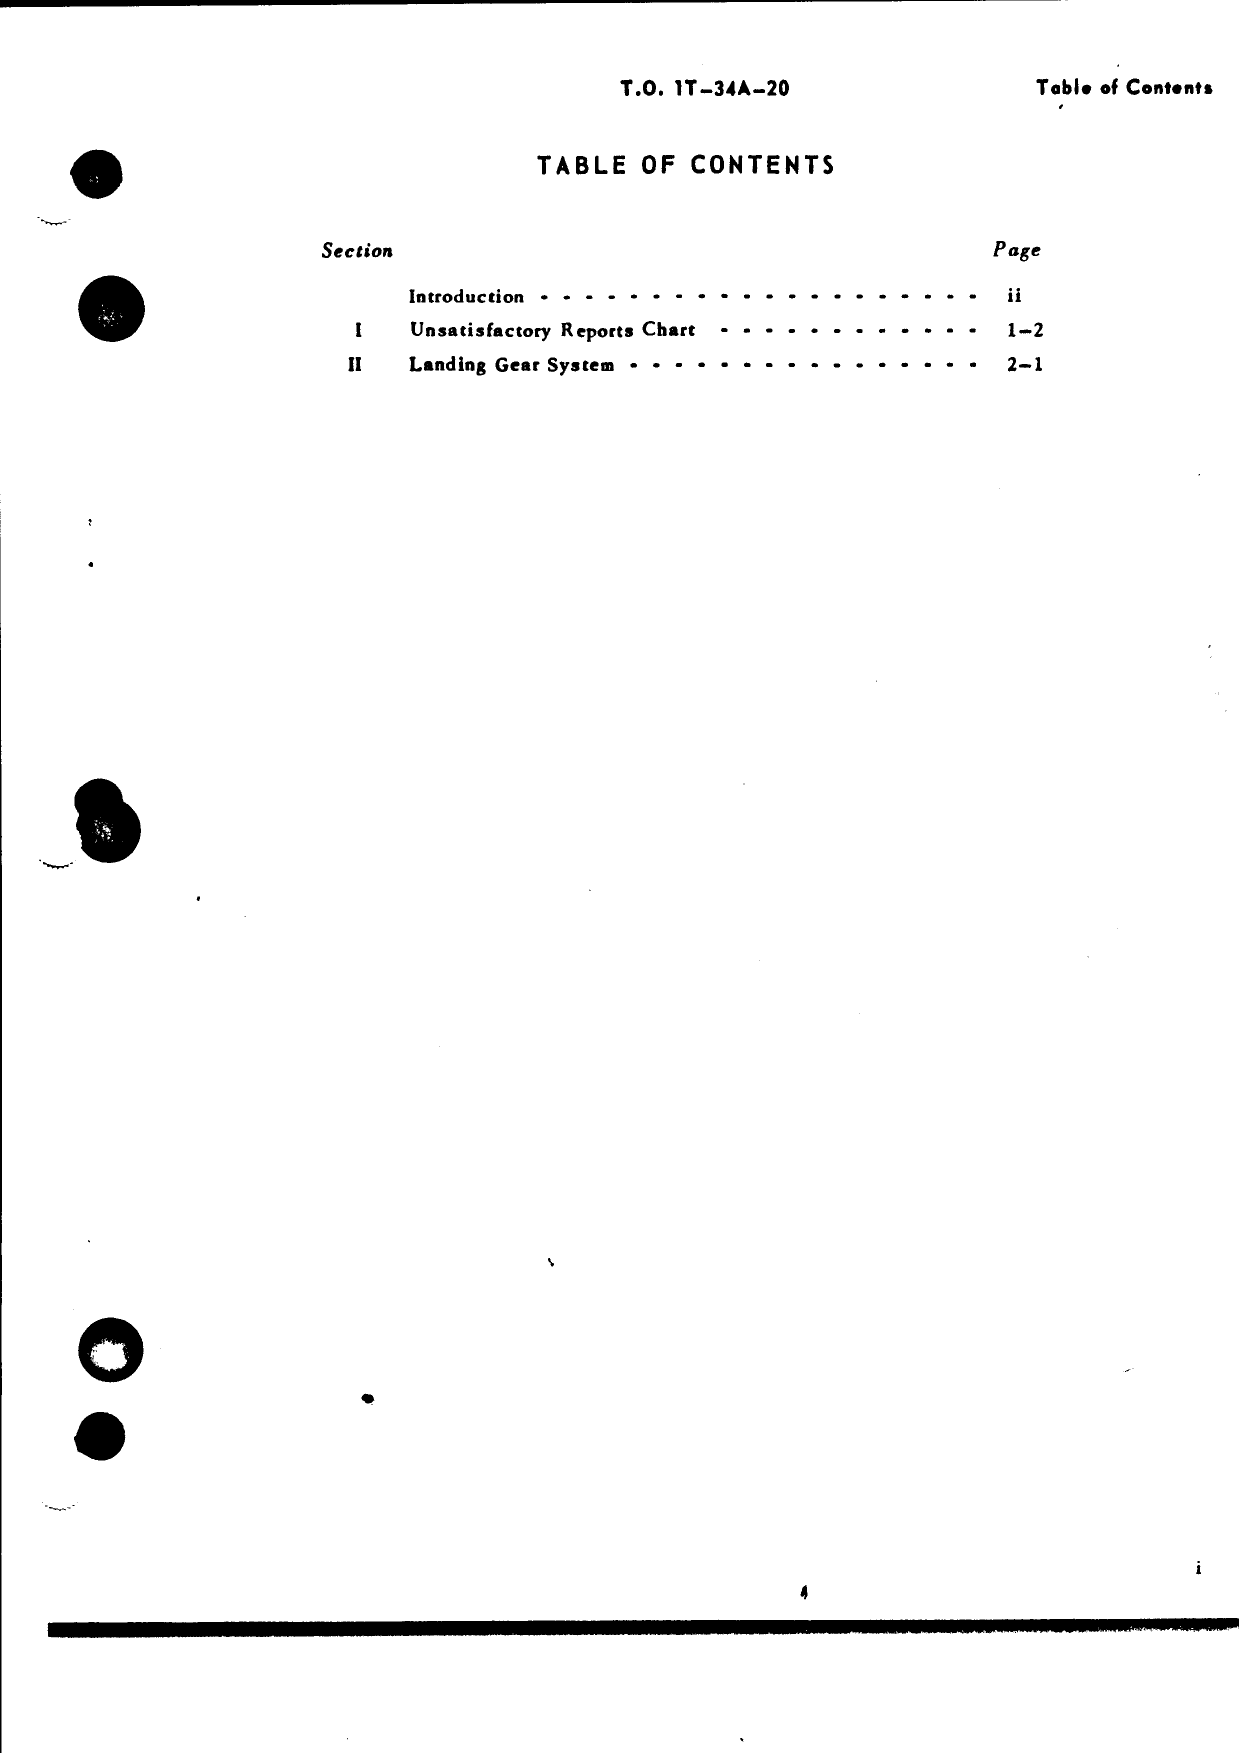 Sample page 3 from AirCorps Library document: Product Improvement Digest for T-34A Aircraft